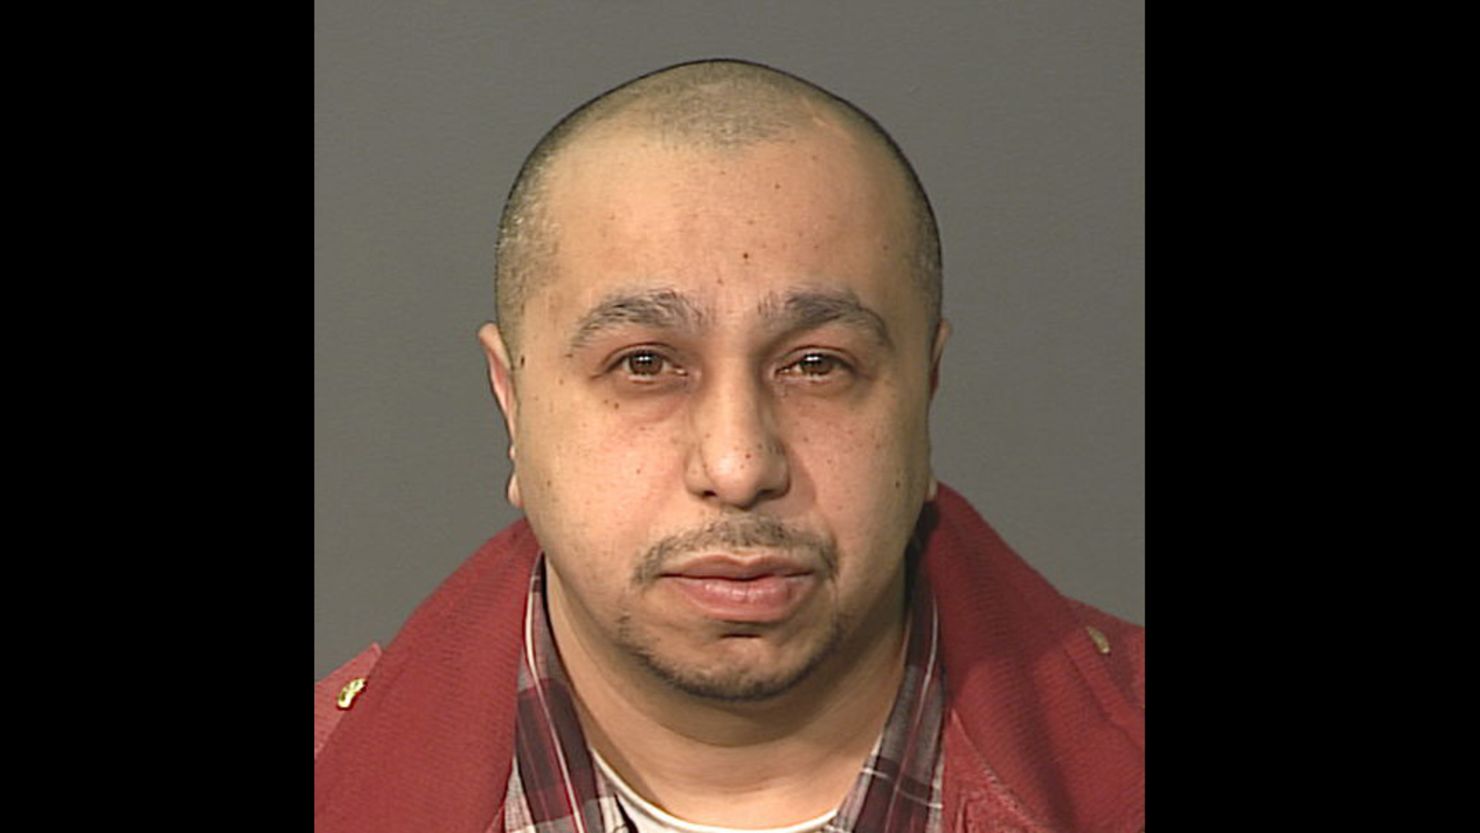 Julio Acevedo, 44, turned himself in in connection with the hit-and-run crash that killed a Brooklyn couple and their unborn child